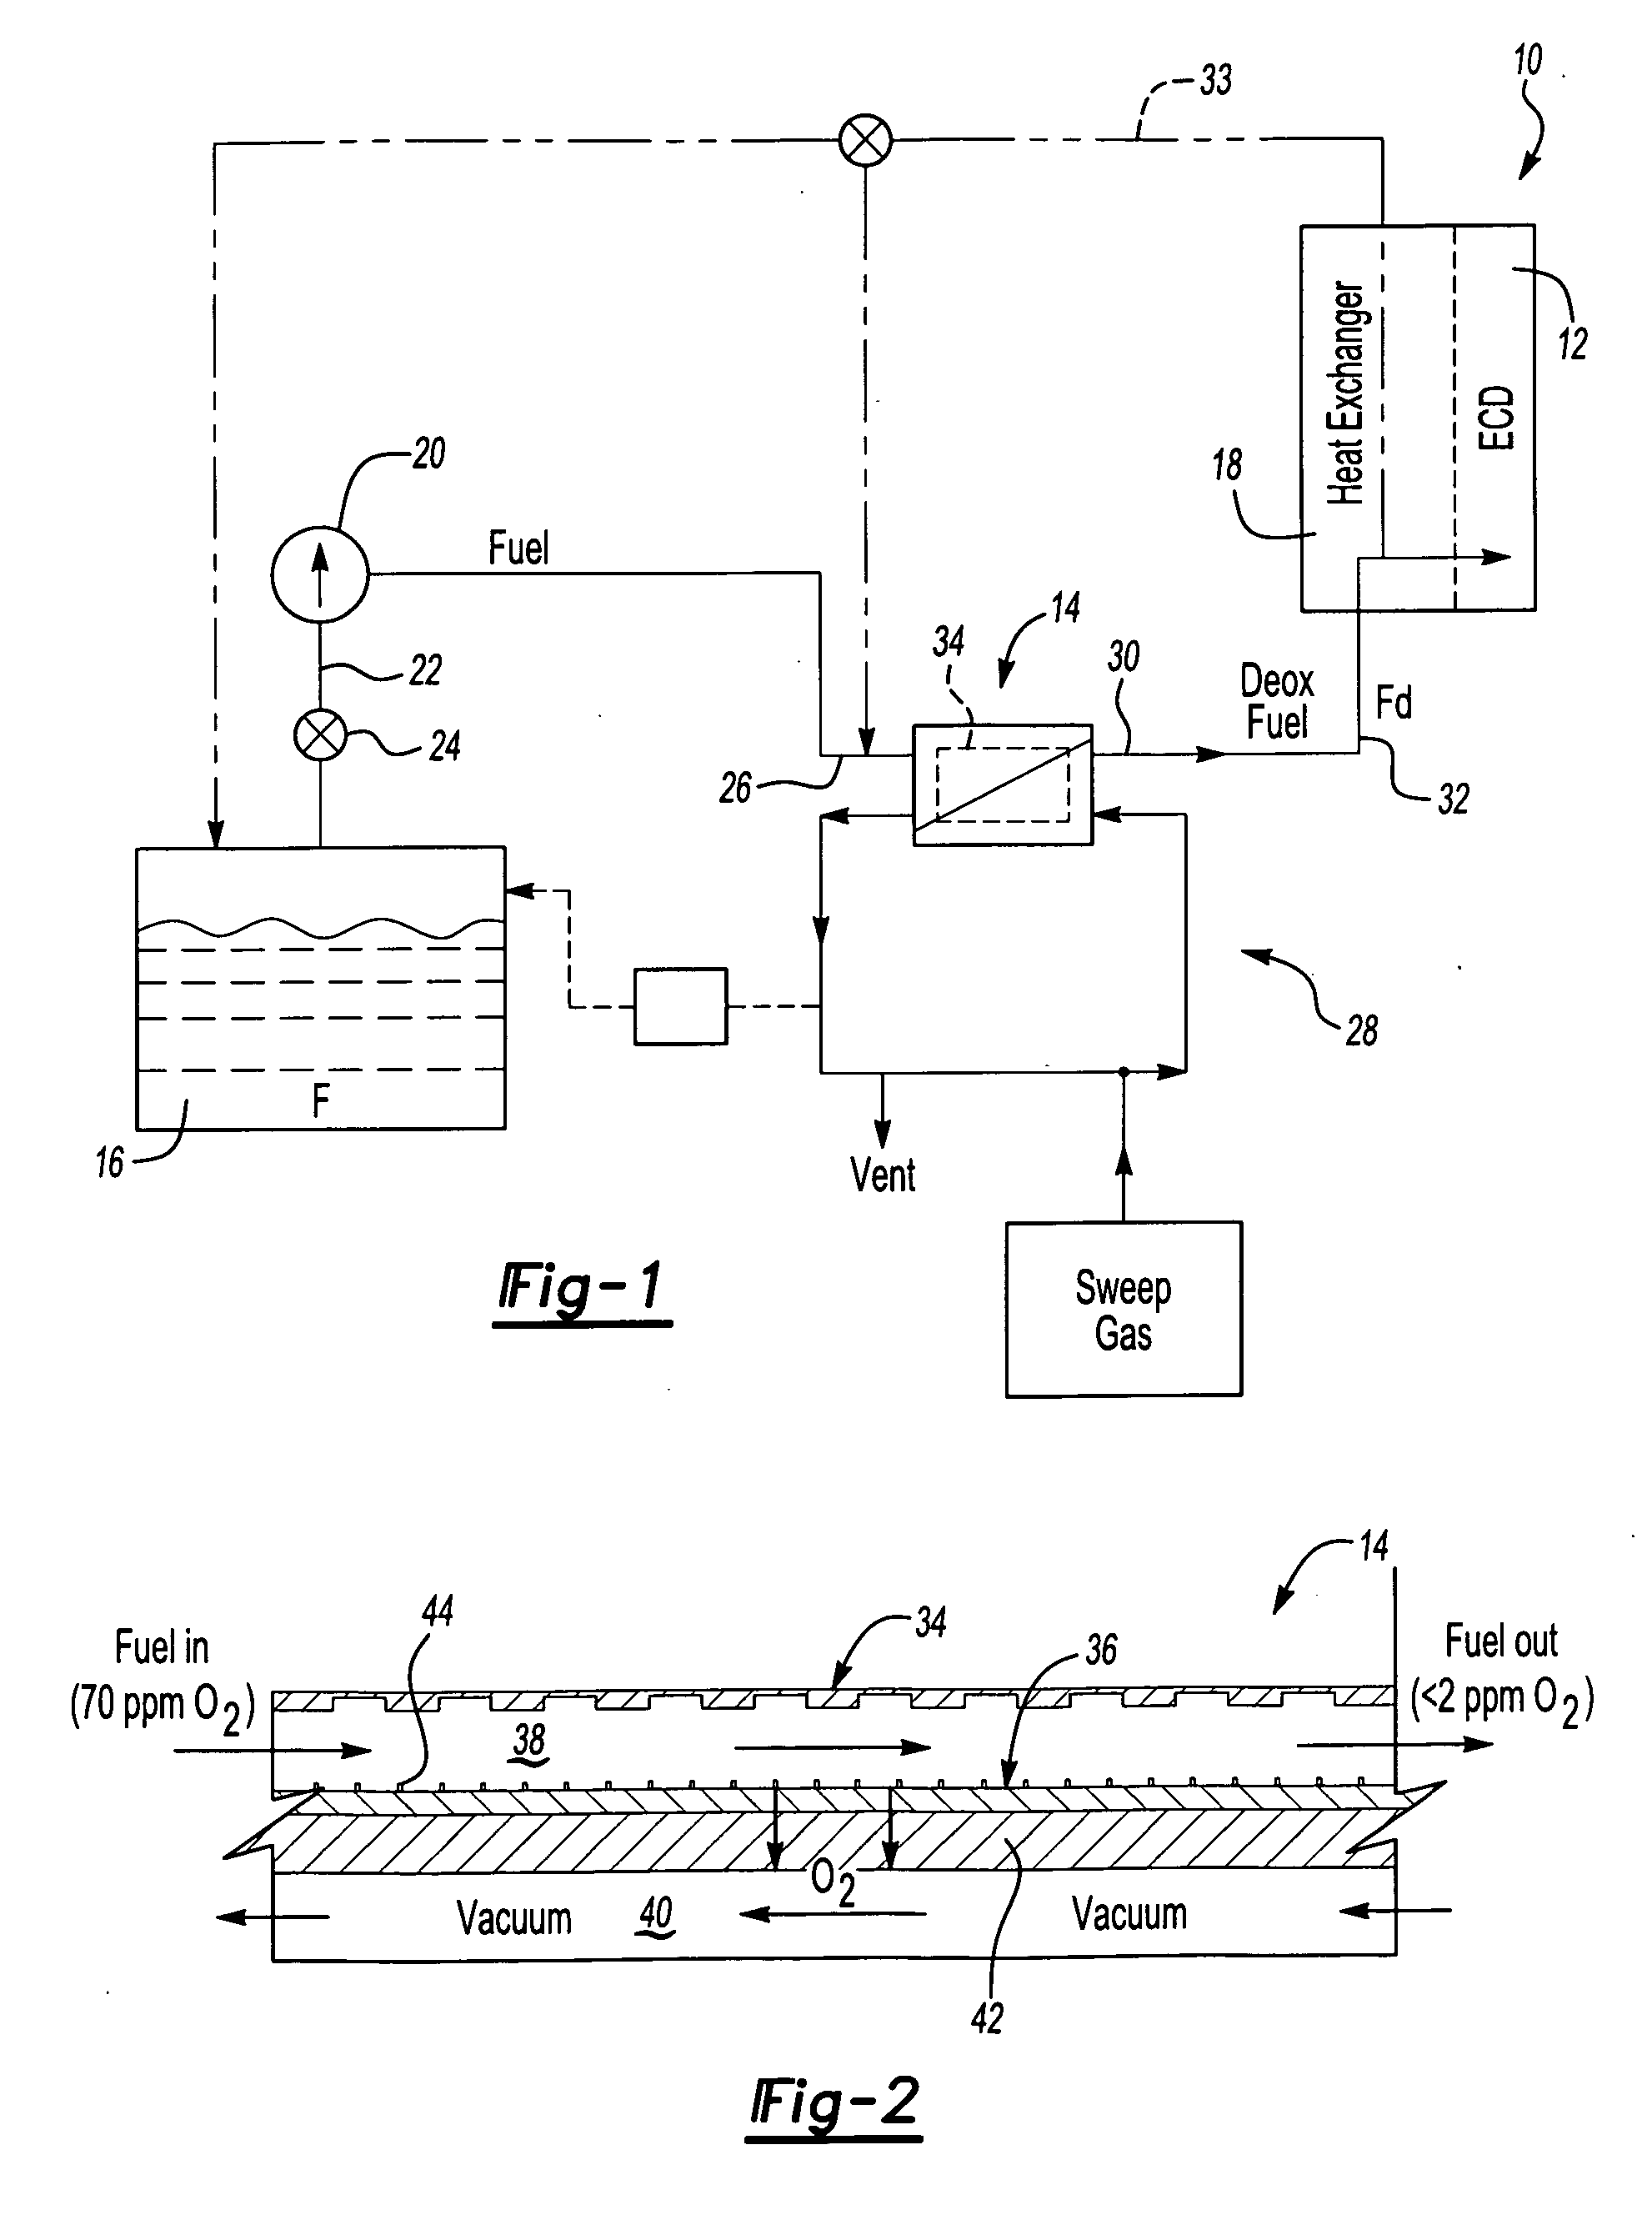 Fuel deoxygenation system with textured oxygen permeable membrane